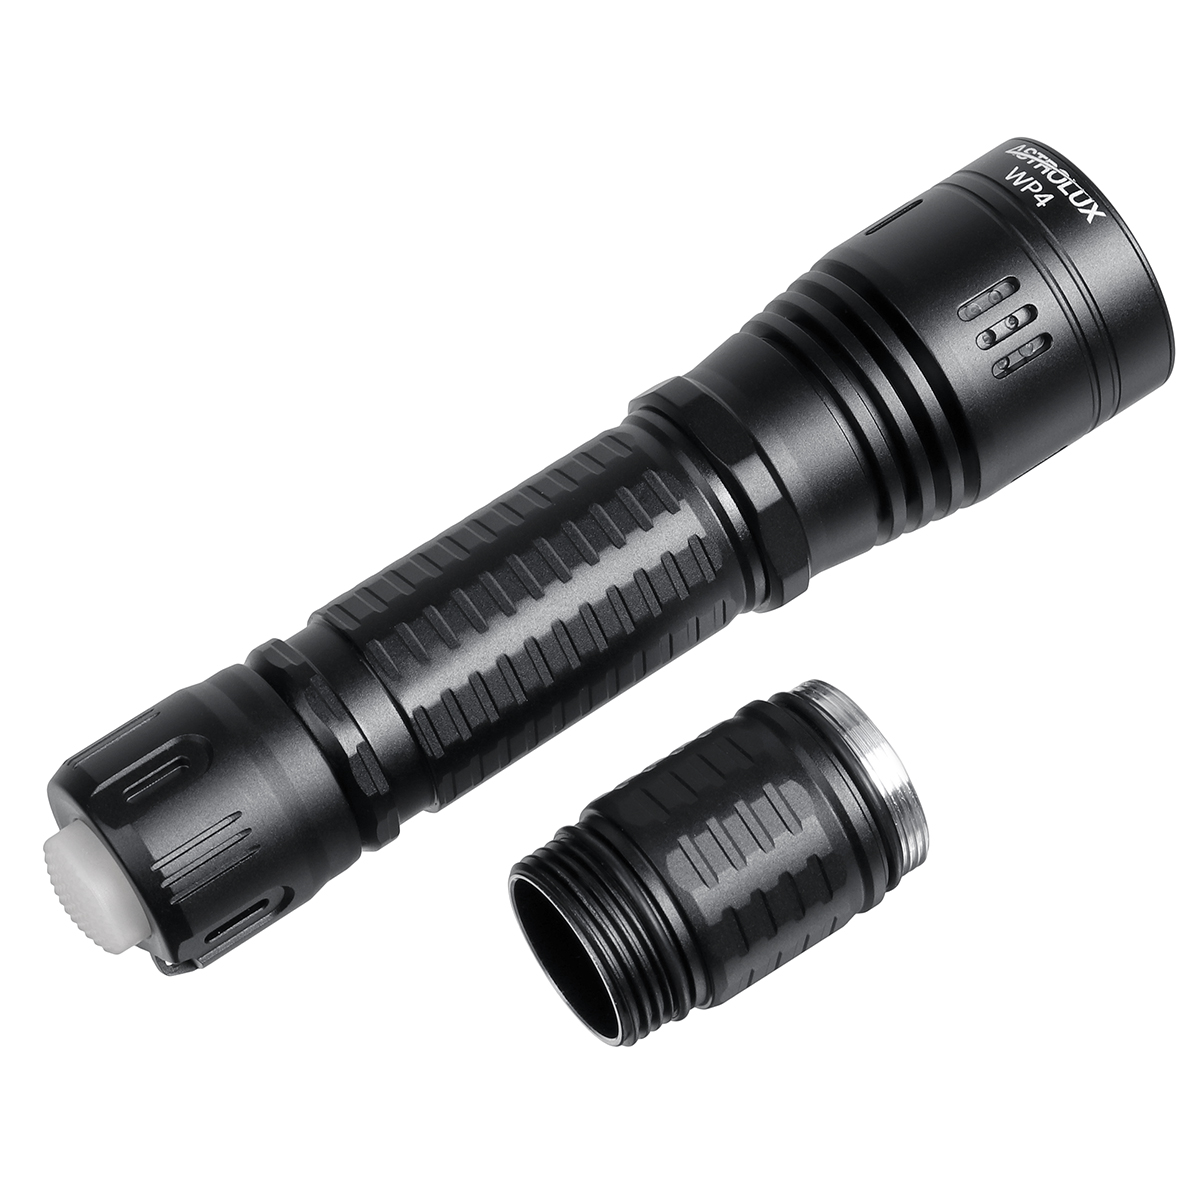 Find Astrolux WP4 1303m 310LM LEP Flashlight Waterproof Outdoor Search Camping Hunting Strong Thrower DIY EDC Flashlight With Glow Ring 18650 Battery for Sale on Gipsybee.com with cryptocurrencies